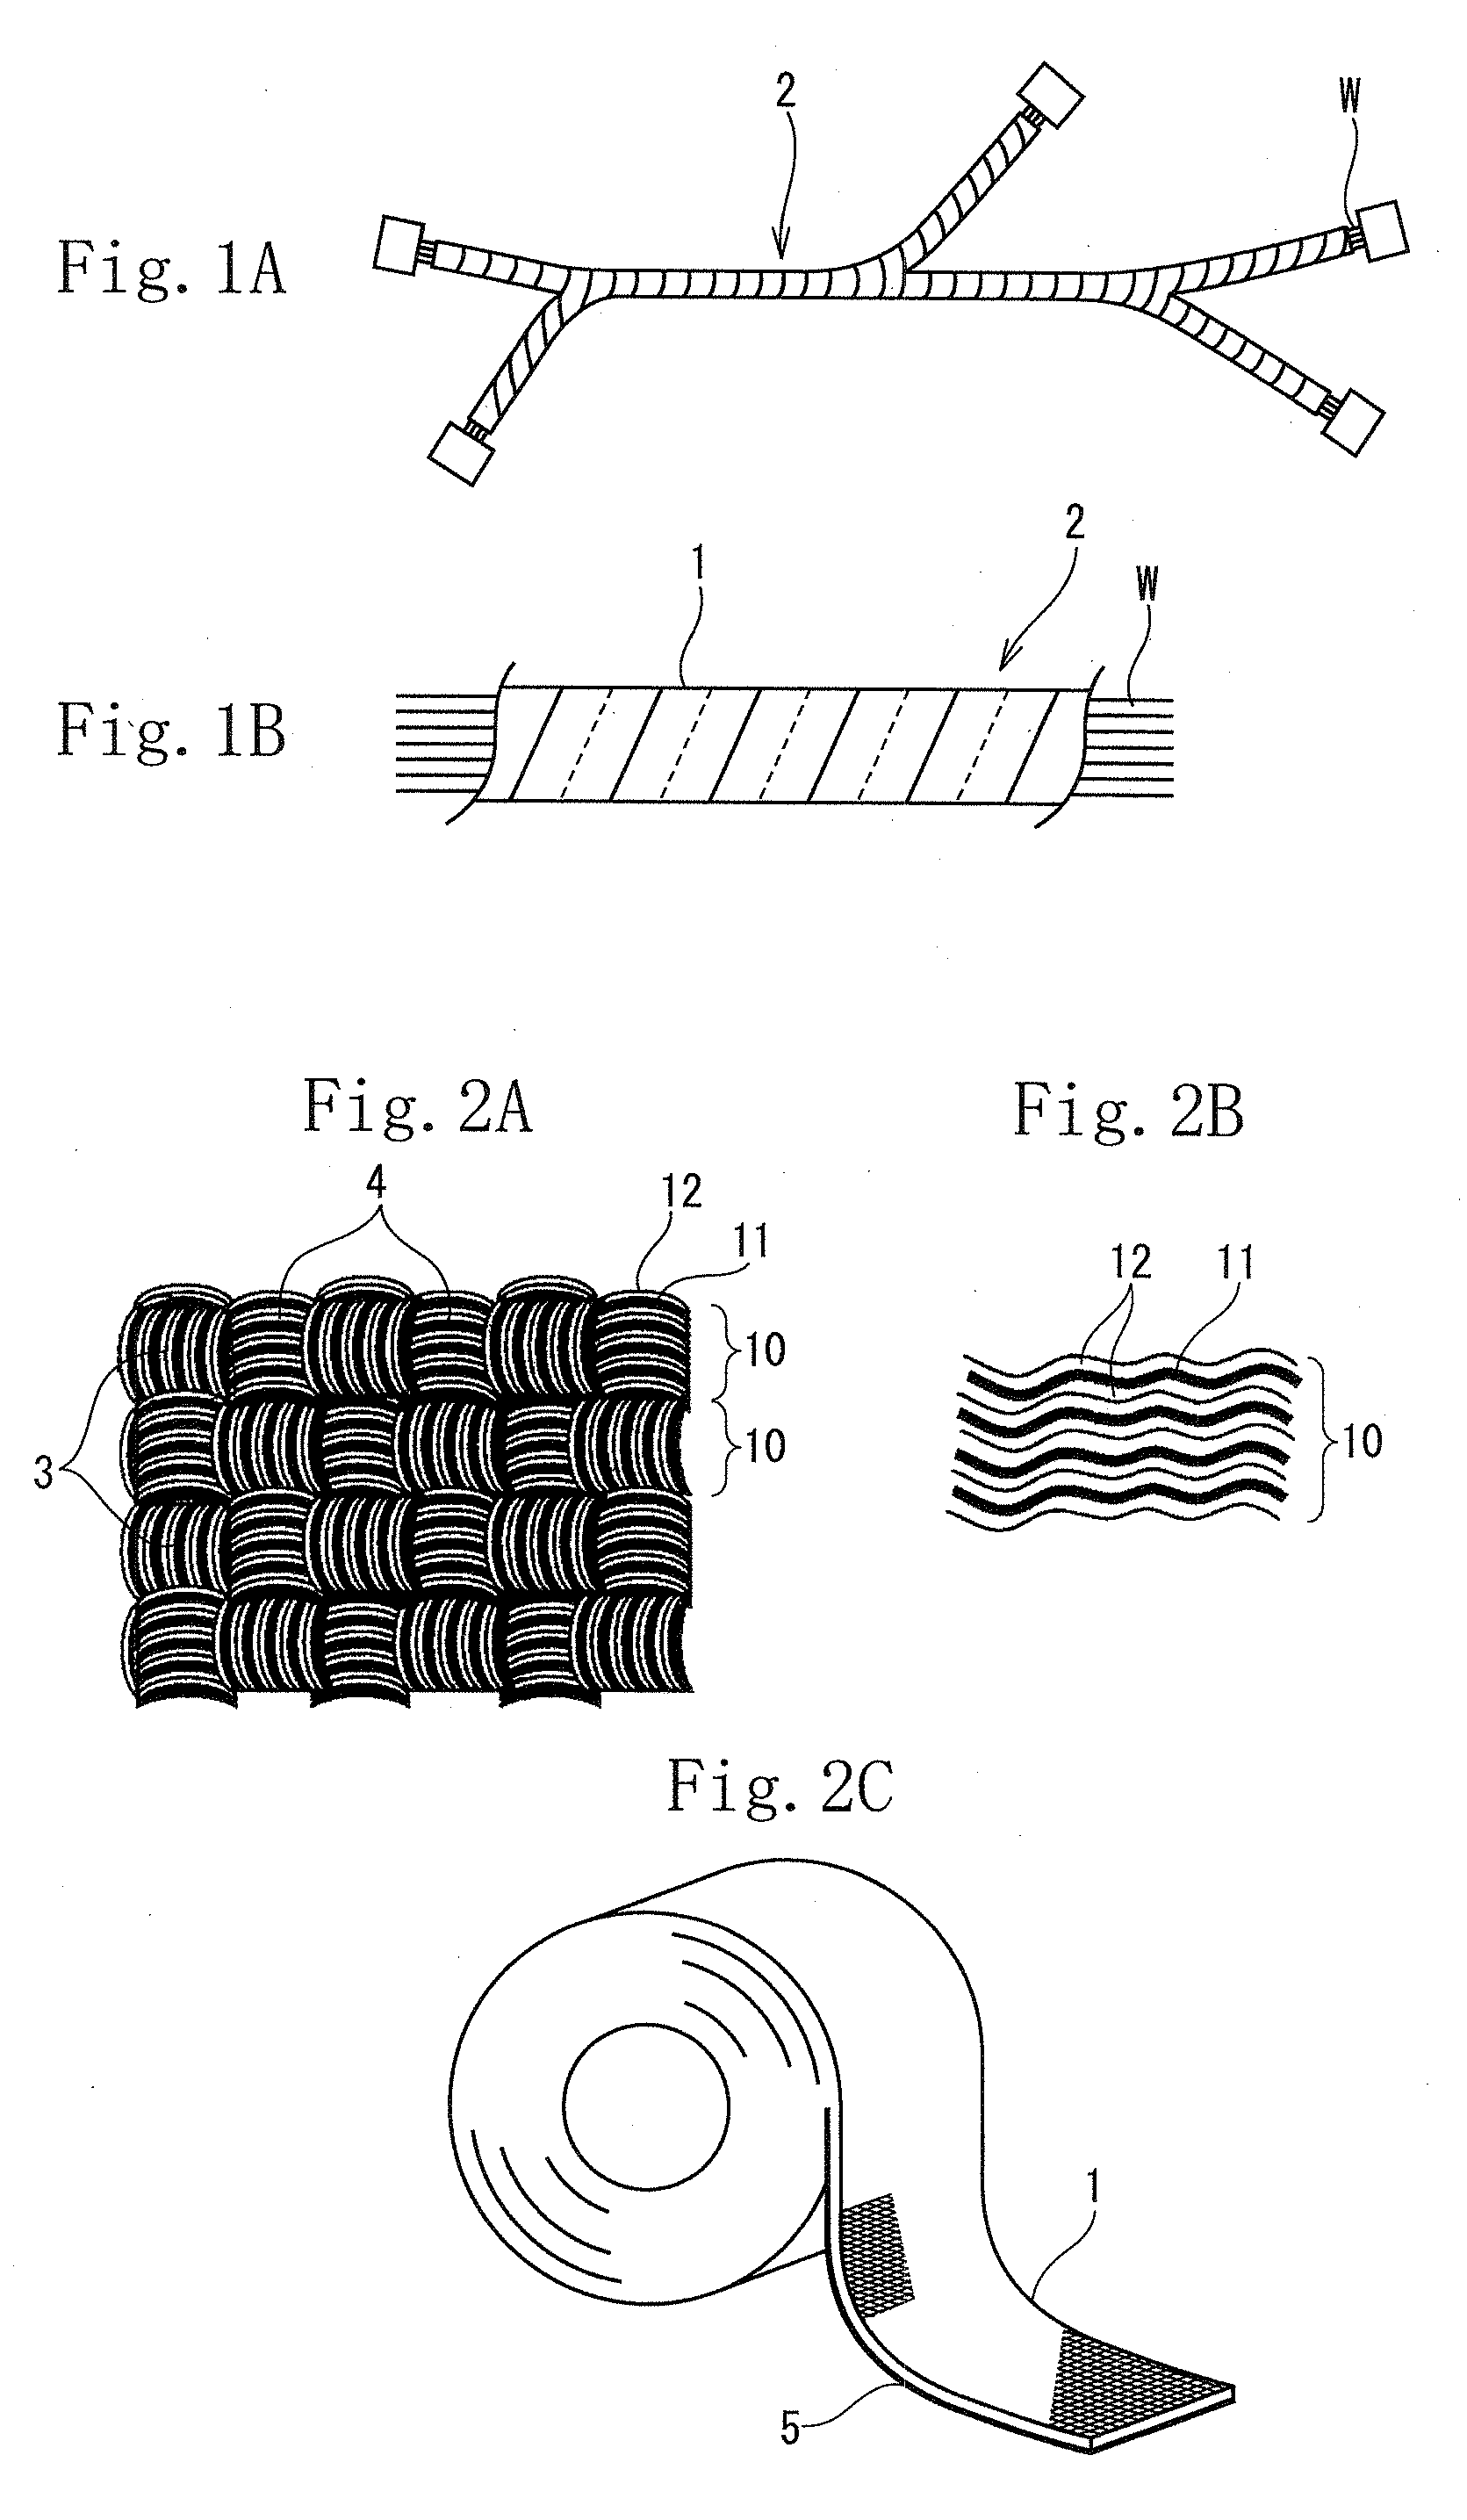 Tape for electric wire